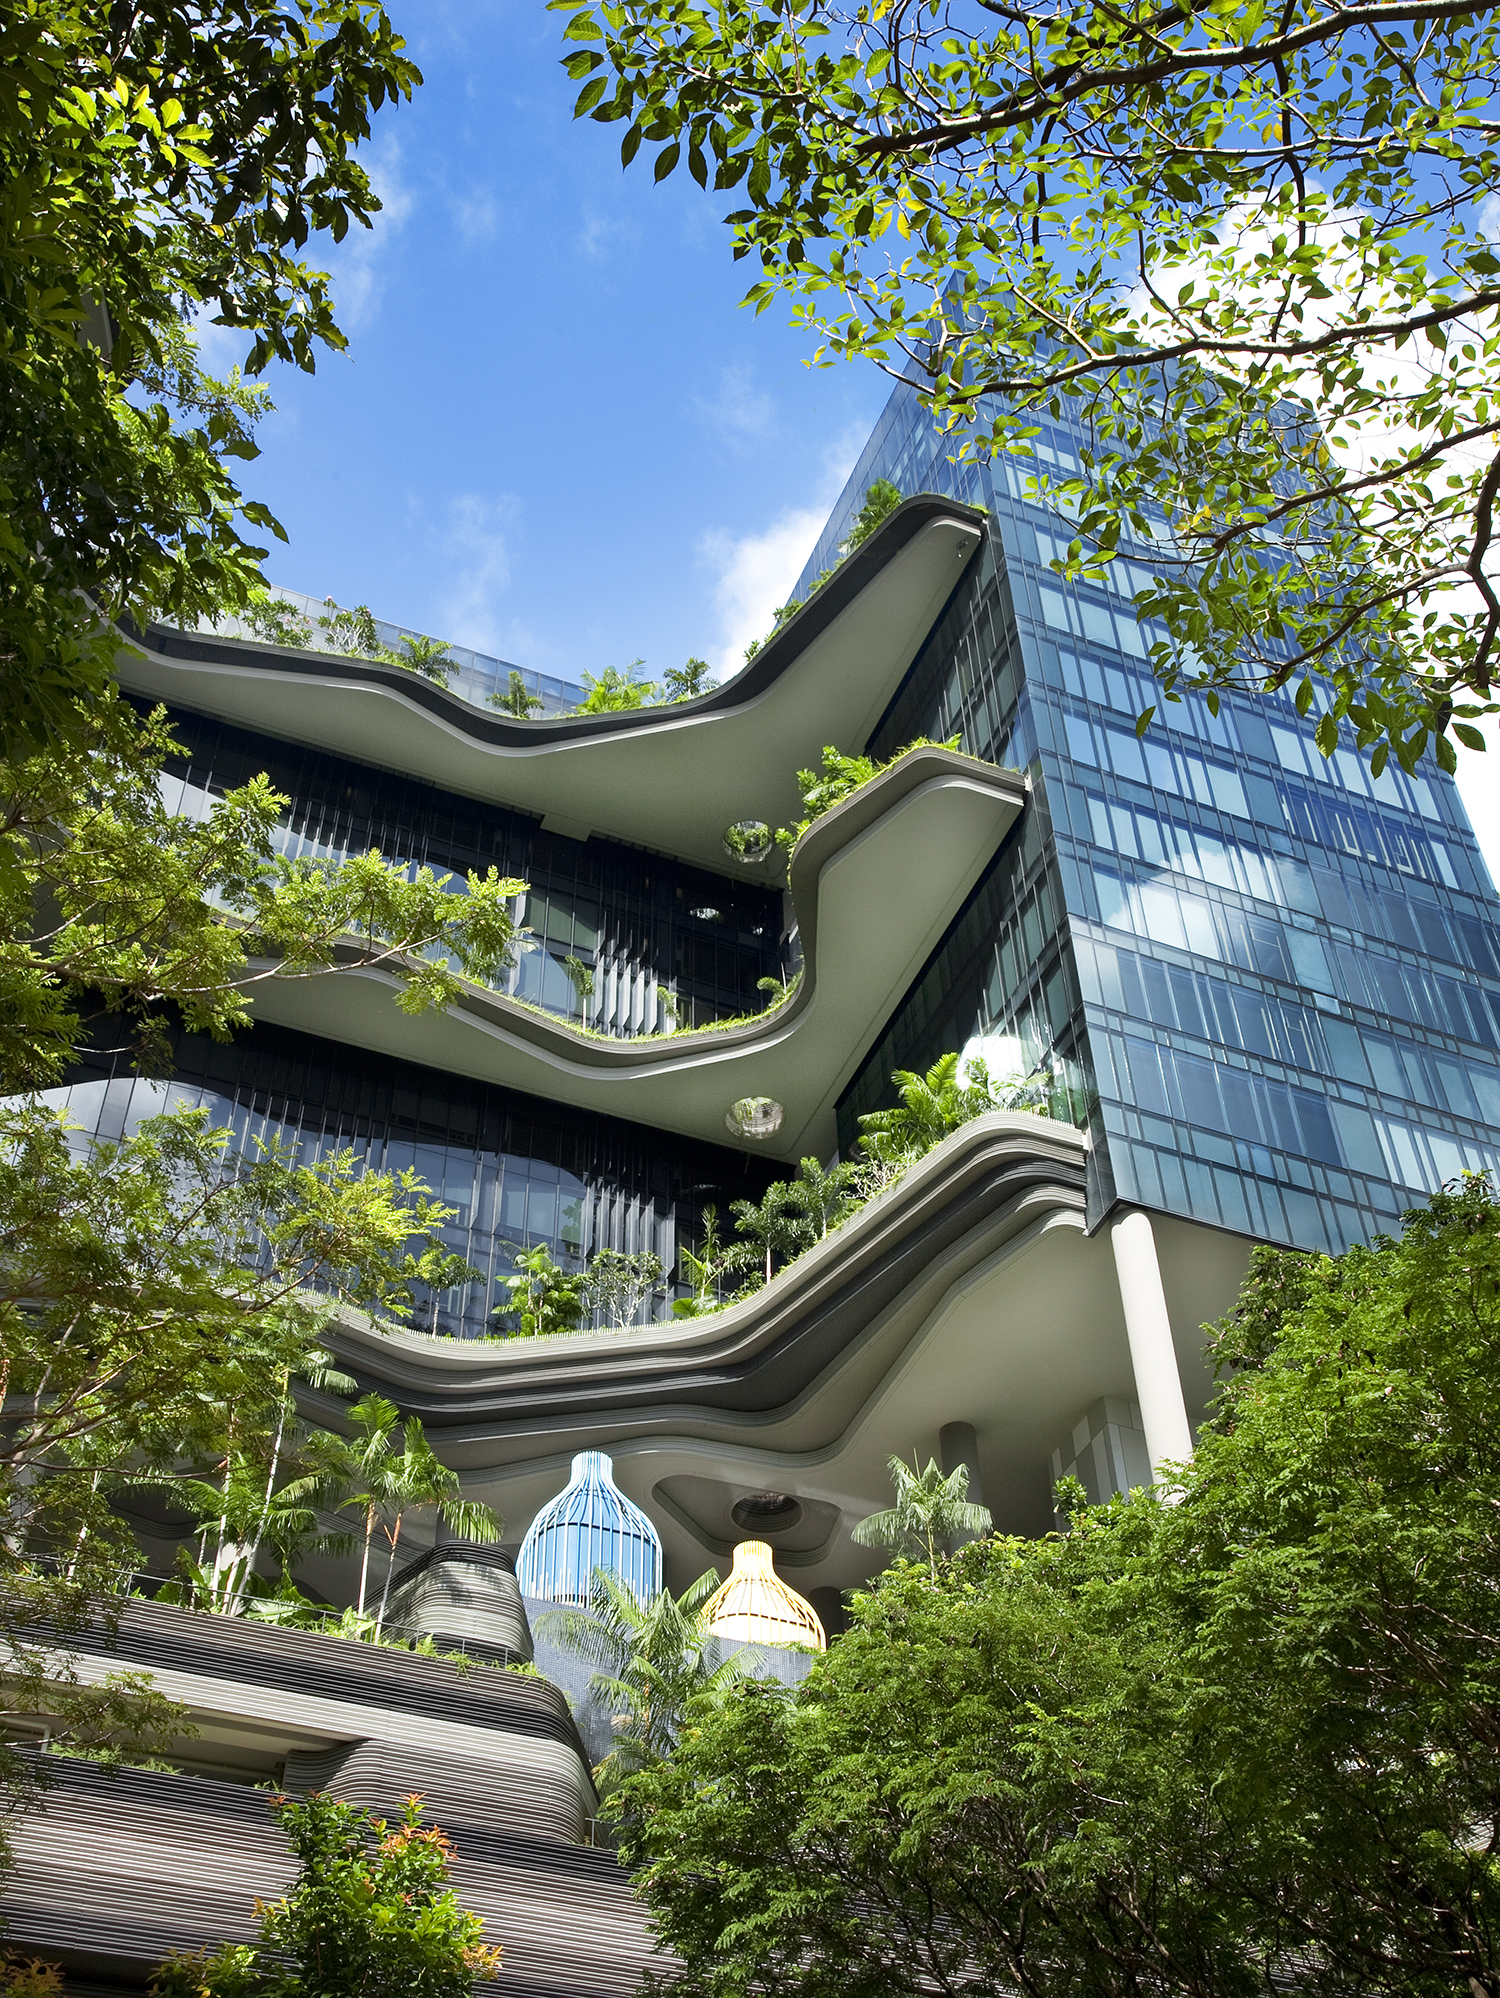 Hotel skygardens mimic natural landscapes and contoured padi fields of Asia